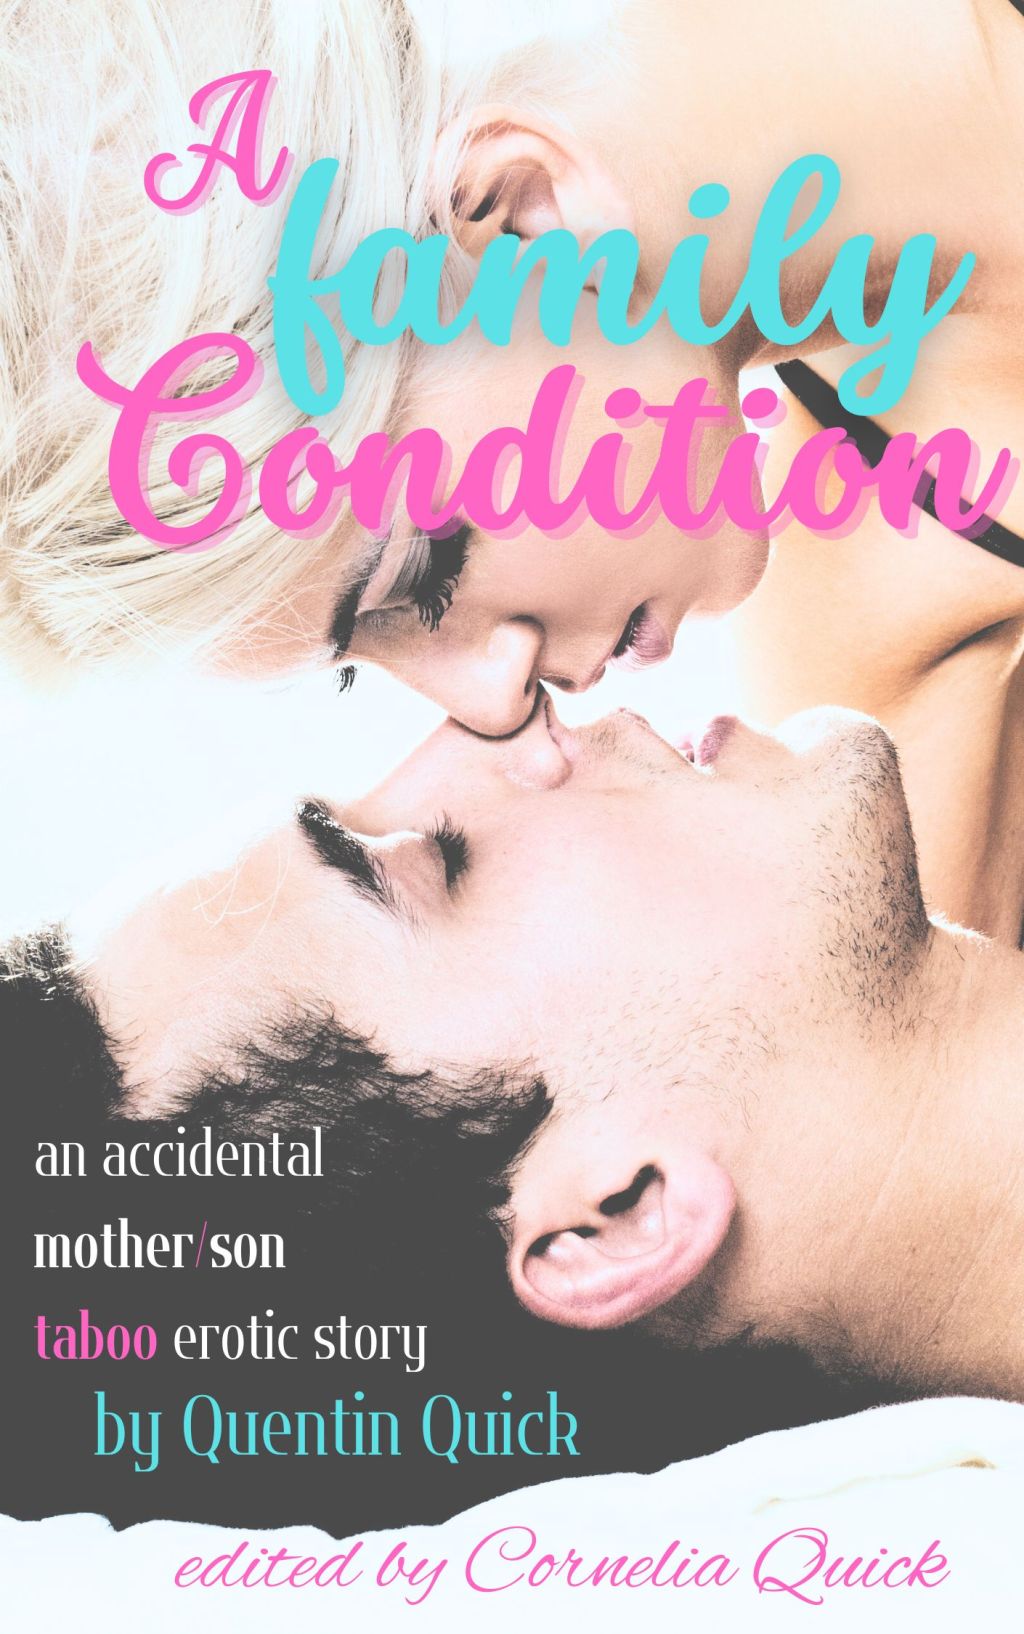 Get “A Family Condition” for 99 cents through April 14